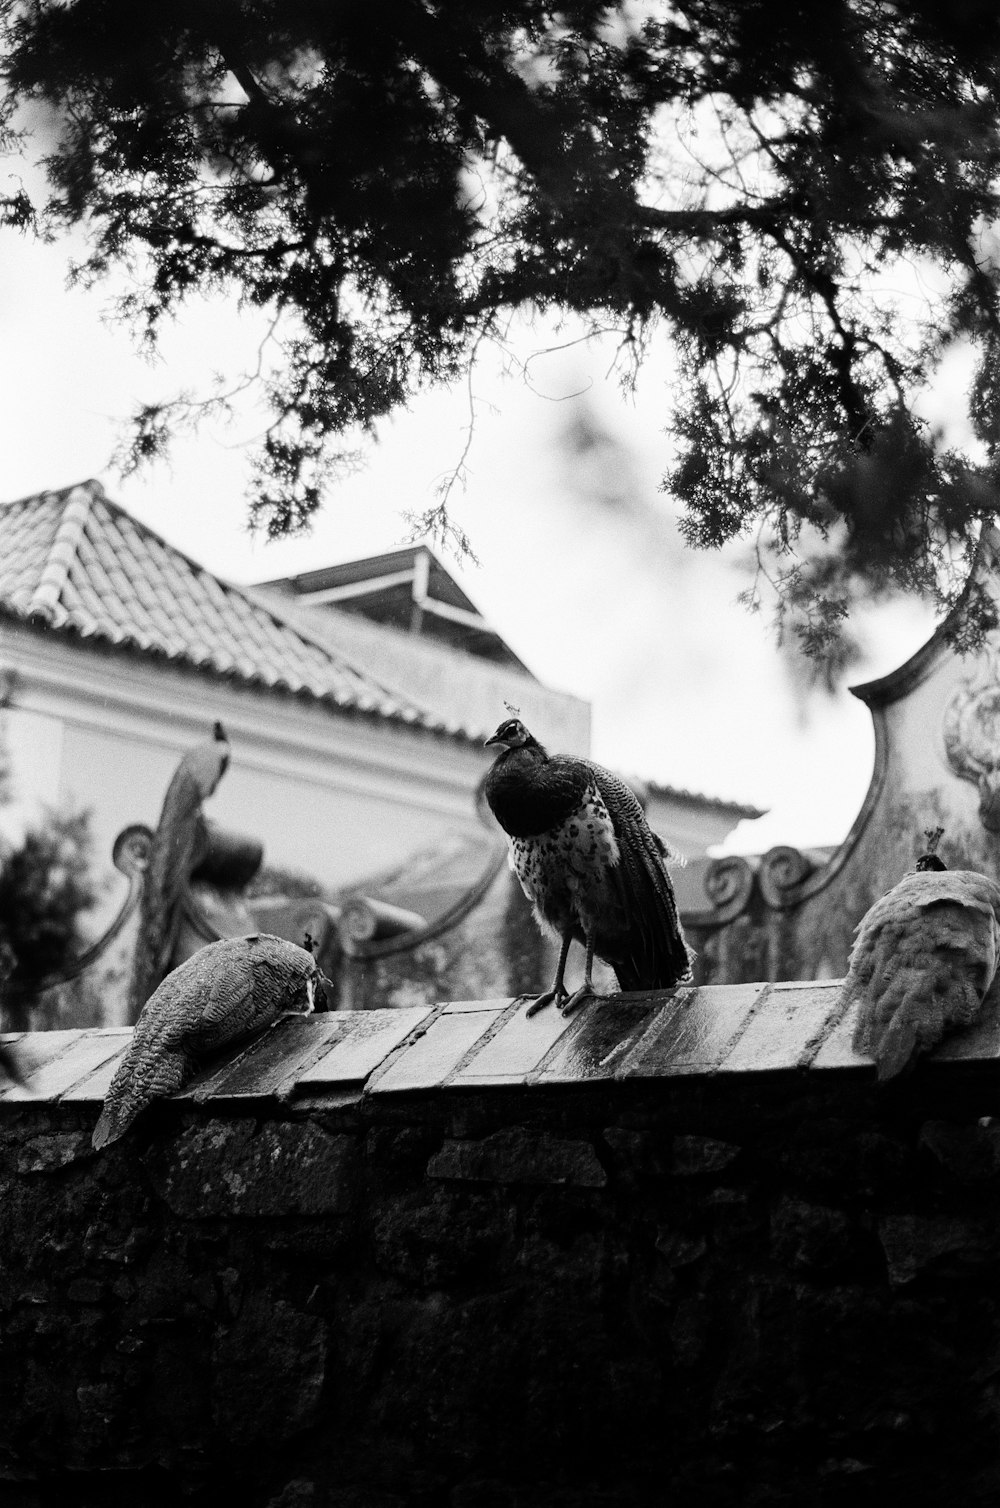 a black and white photo of birds on a ledge